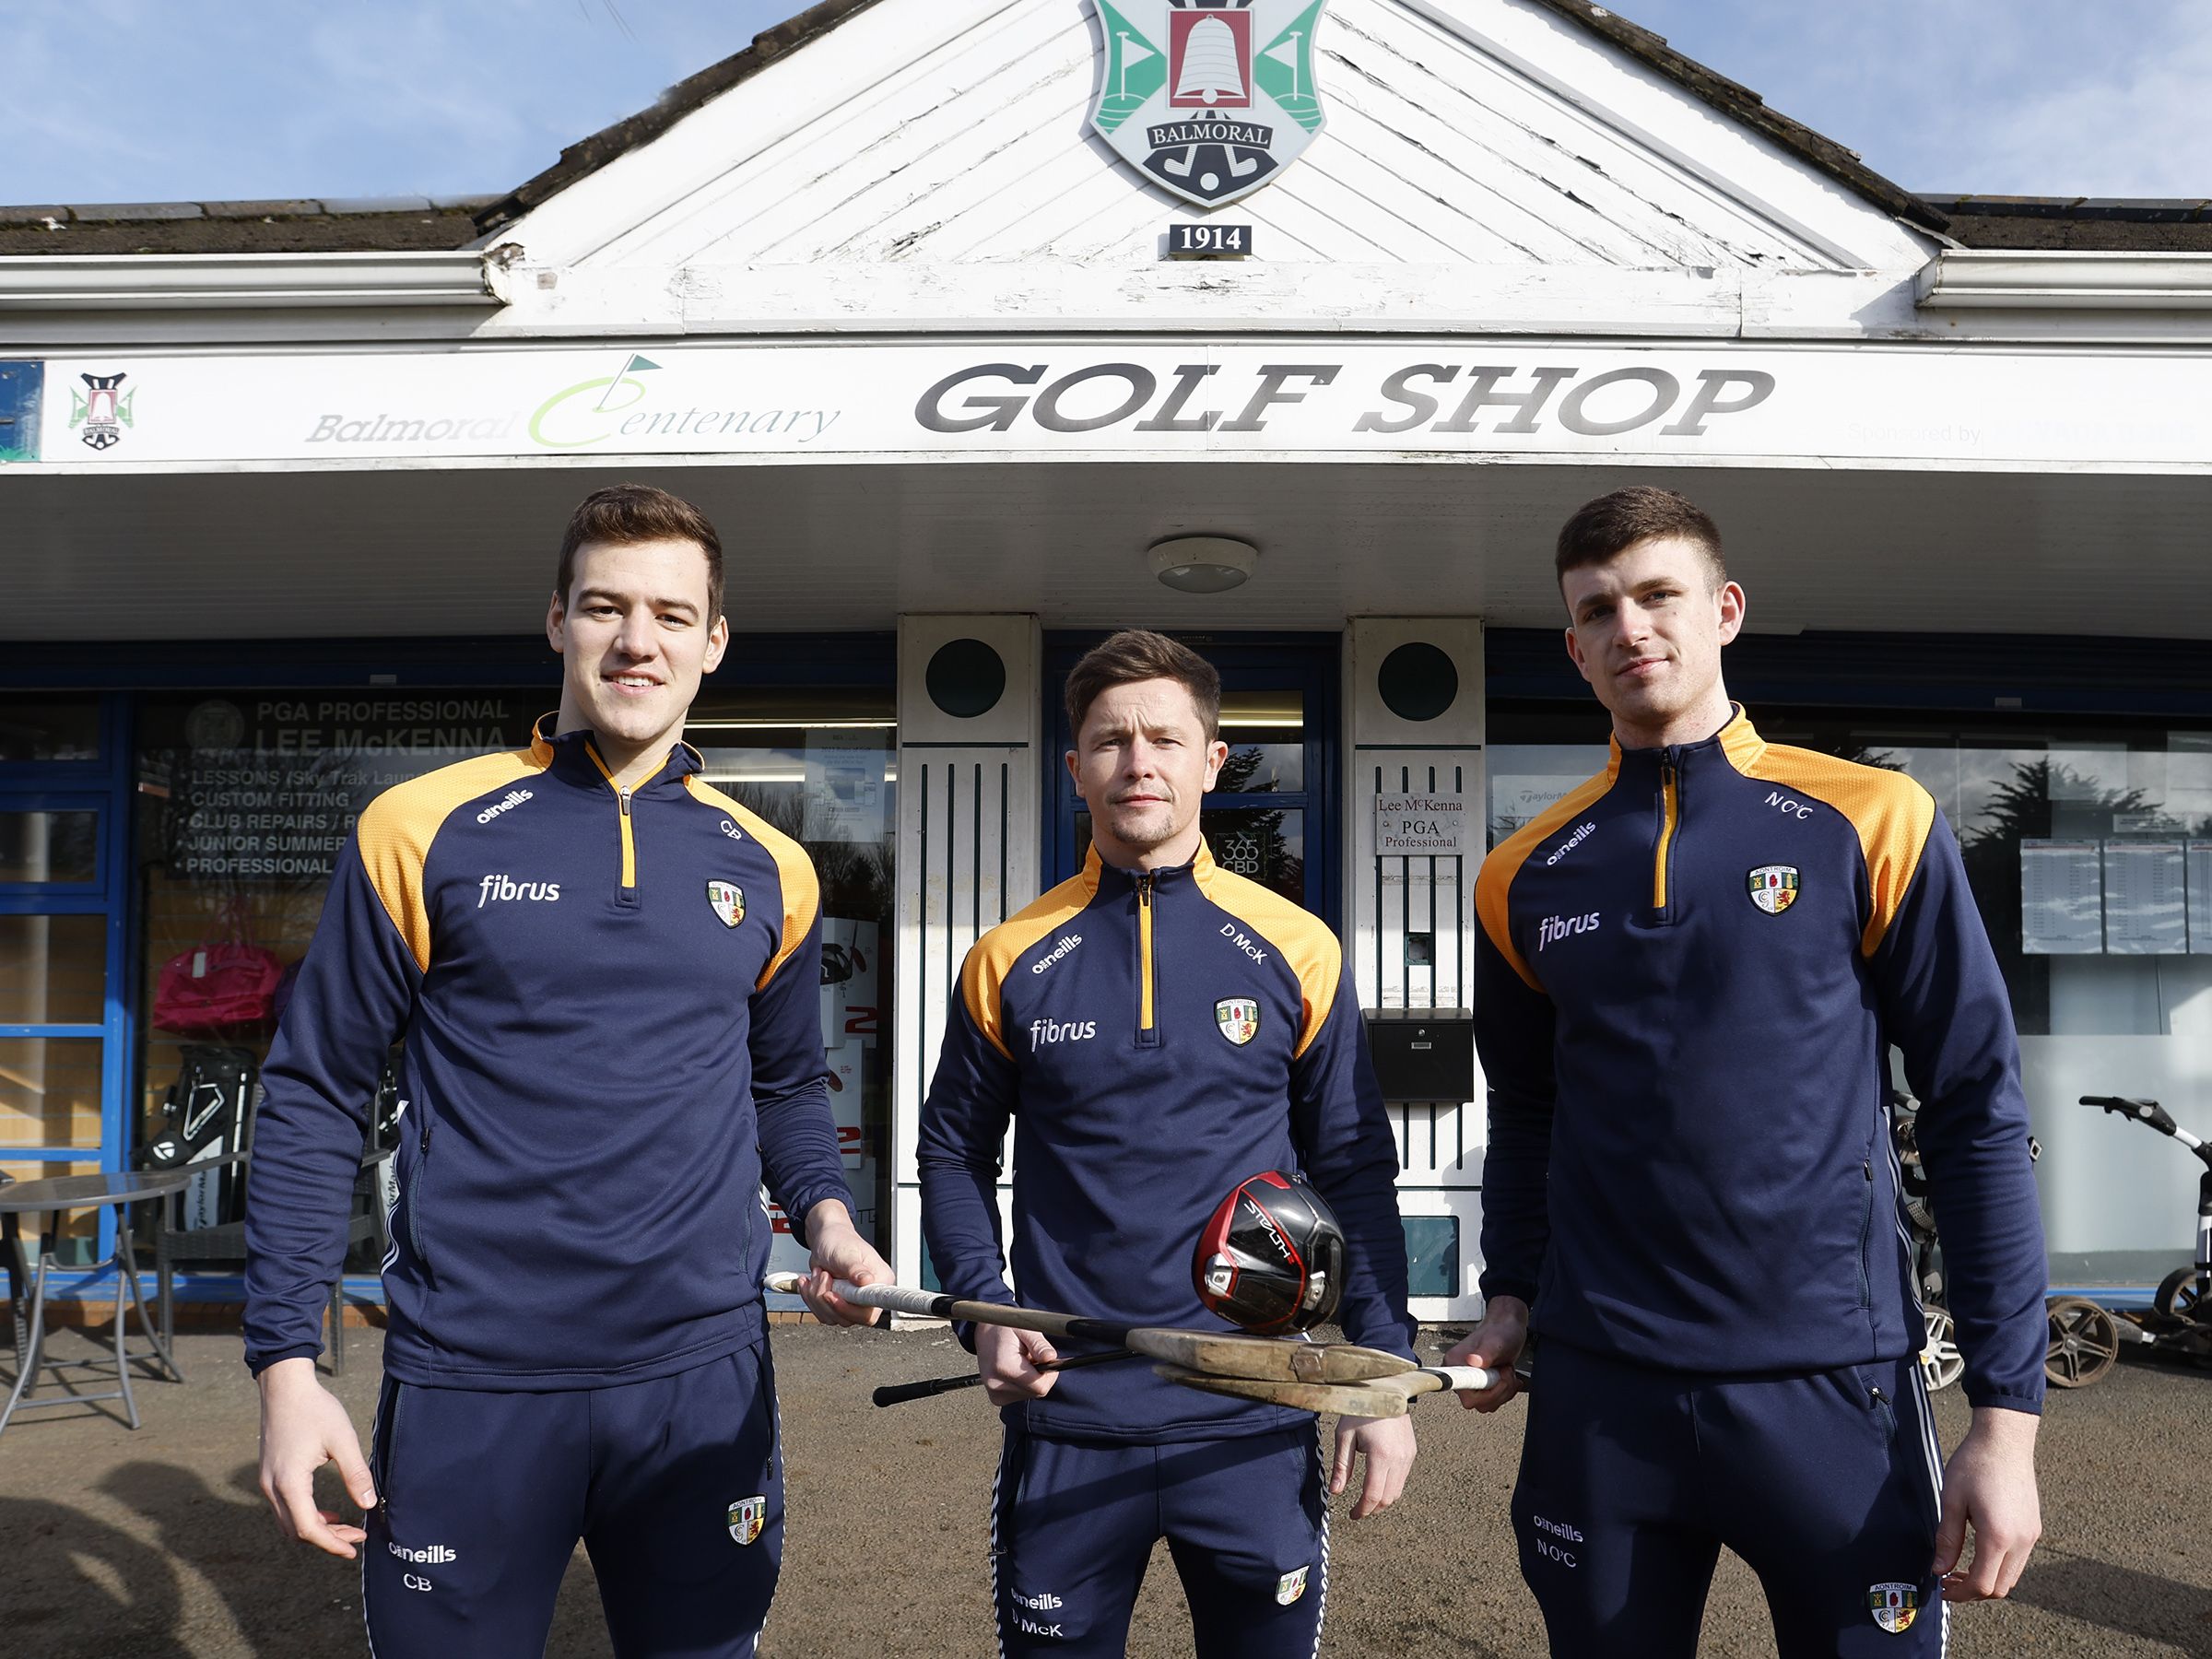 Antrim hurlers (L-R): Conall Bohill, Daniel McKernan and Niall O\'Connor at the launch of the 2023 Antrim Senior Hurling Golf Classic that takes place at Balmoral Golf Course on April 14